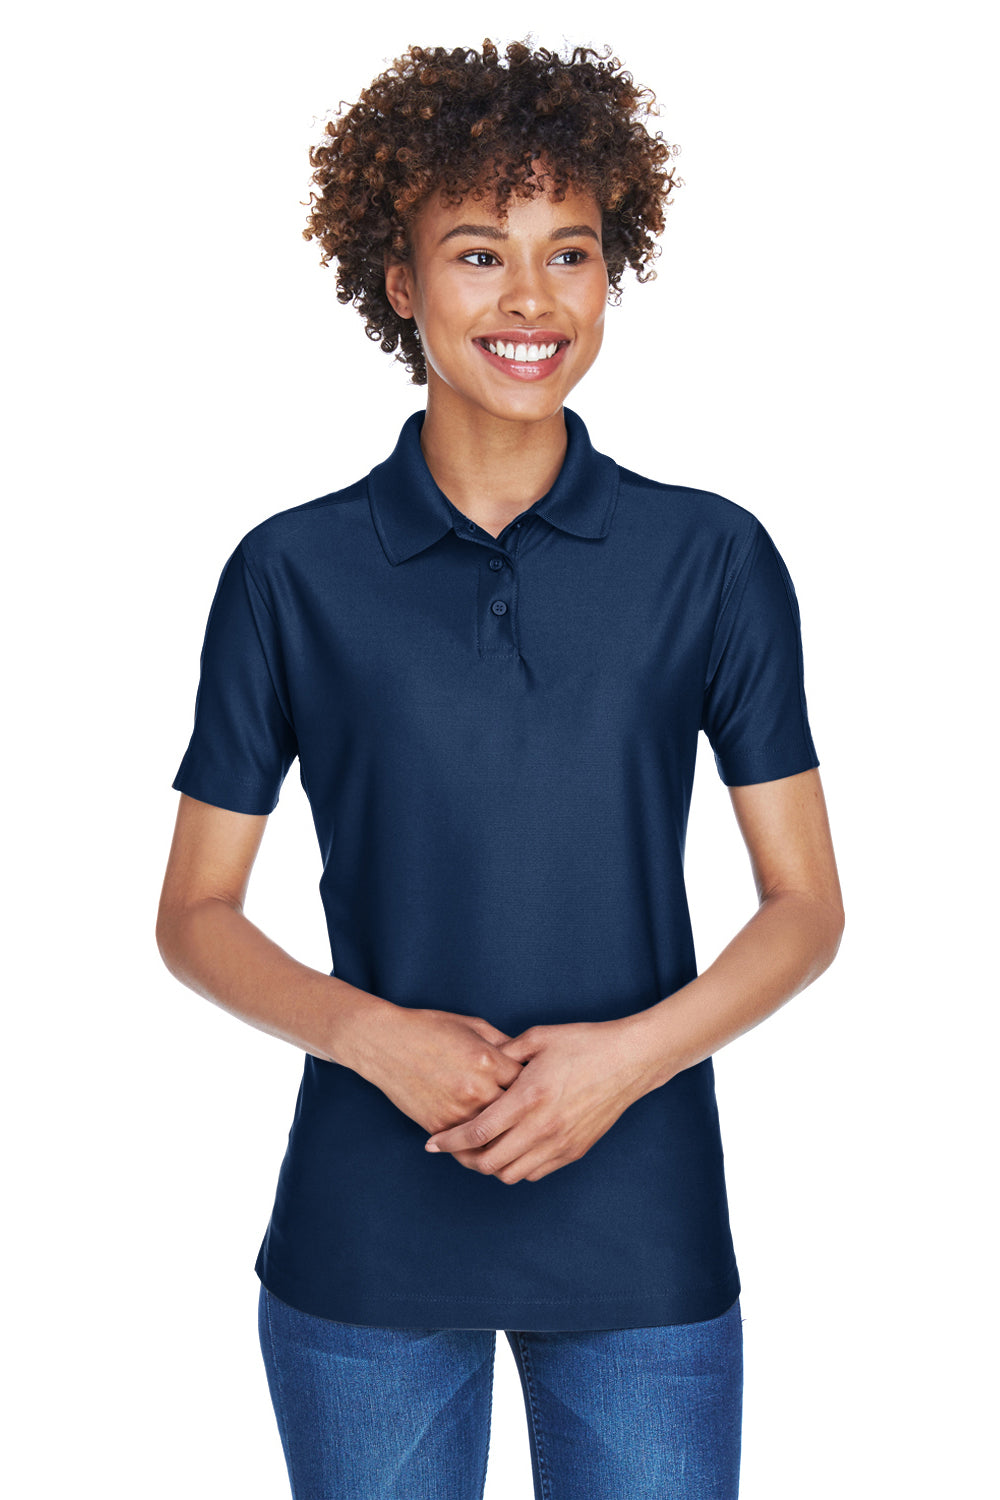 UltraClub 8414 Womens Cool & Dry Elite Performance Moisture Wicking Short Sleeve Polo Shirt Navy Blue Front